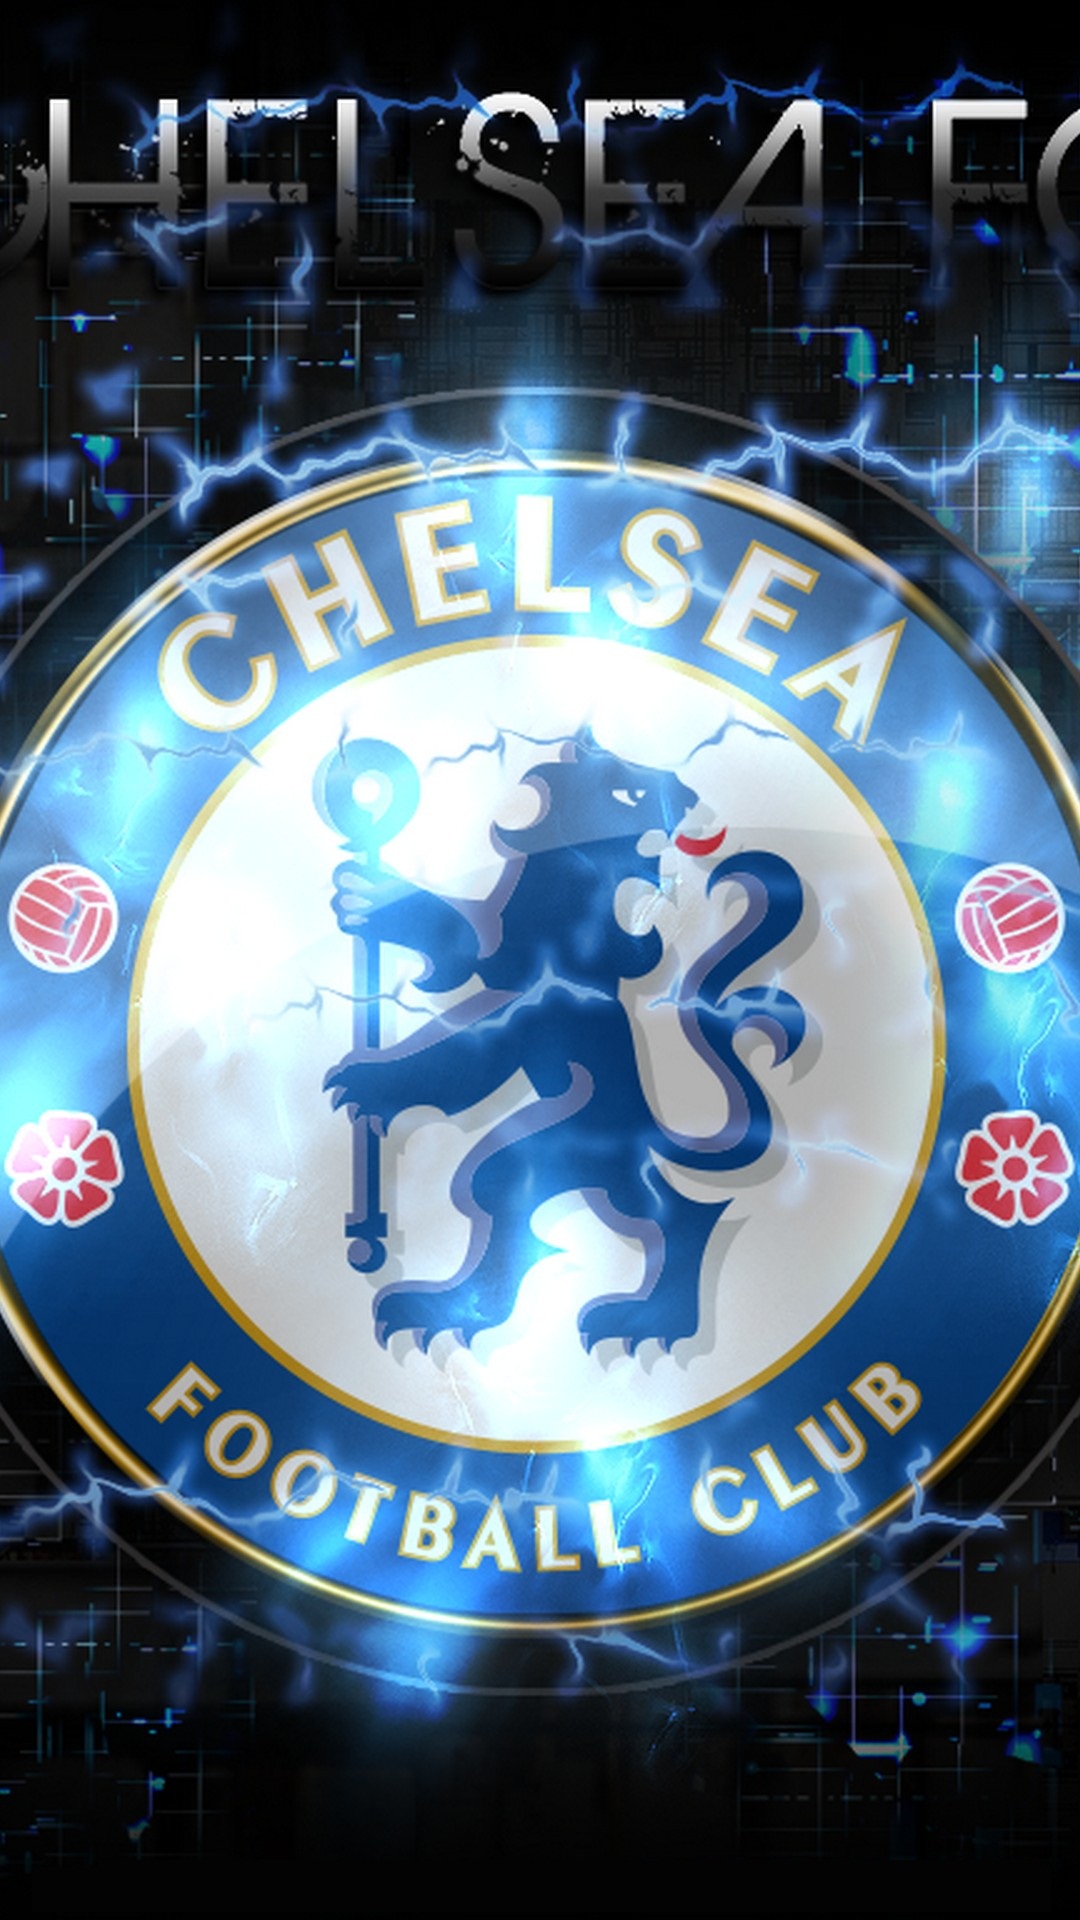 Chelsea Football HD Wallpaper For iPhone With Resolution 1080X1920 pixel. You can make this wallpaper for your Mac or Windows Desktop Background, iPhone, Android or Tablet and another Smartphone device for free